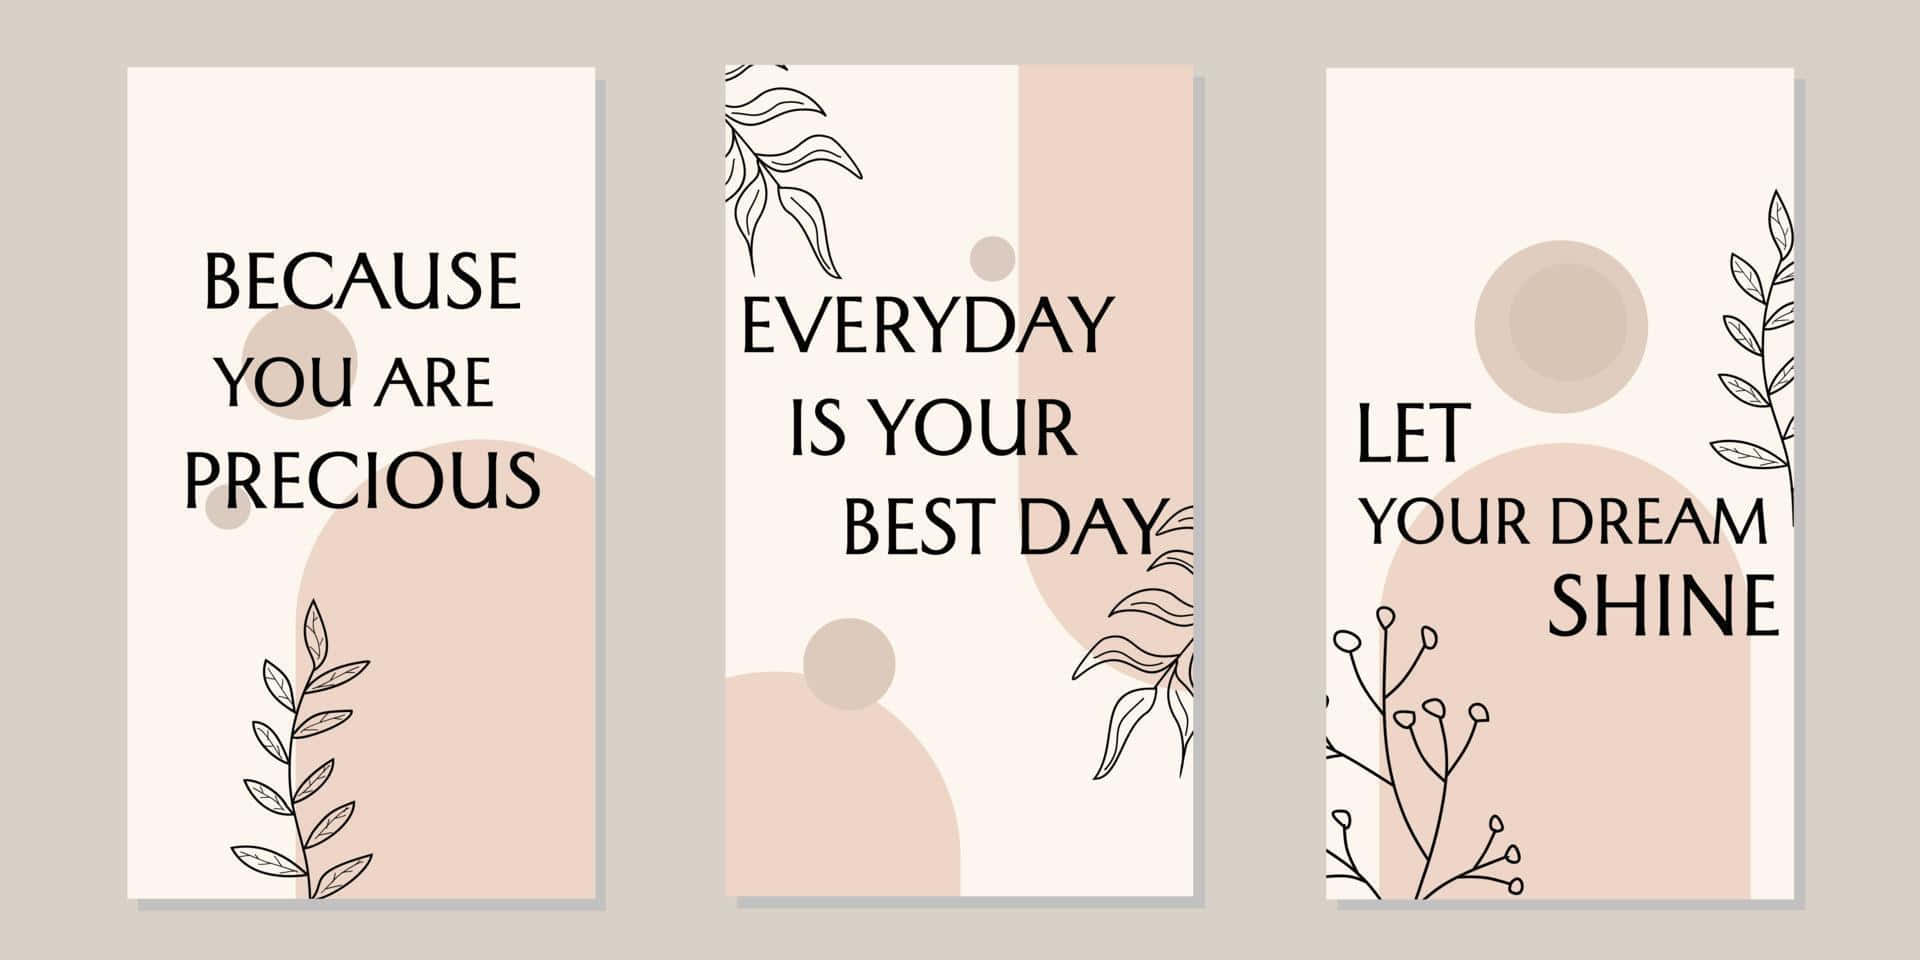 Motivational Quotes on a Colorful Gradient Background